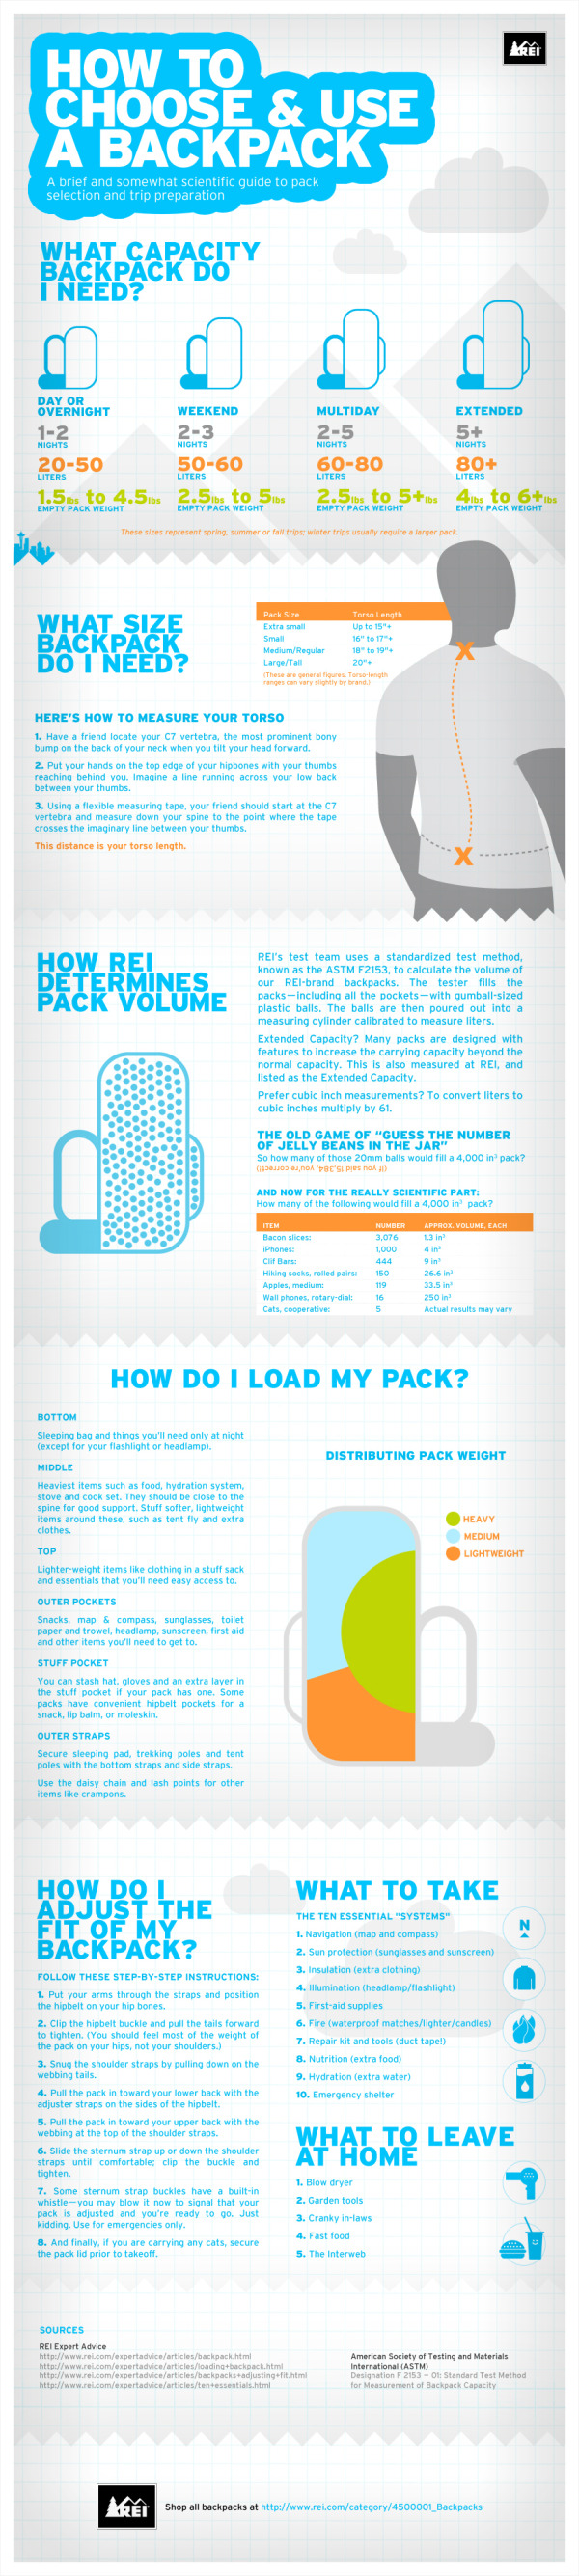 How to choose and use a backpack infographic